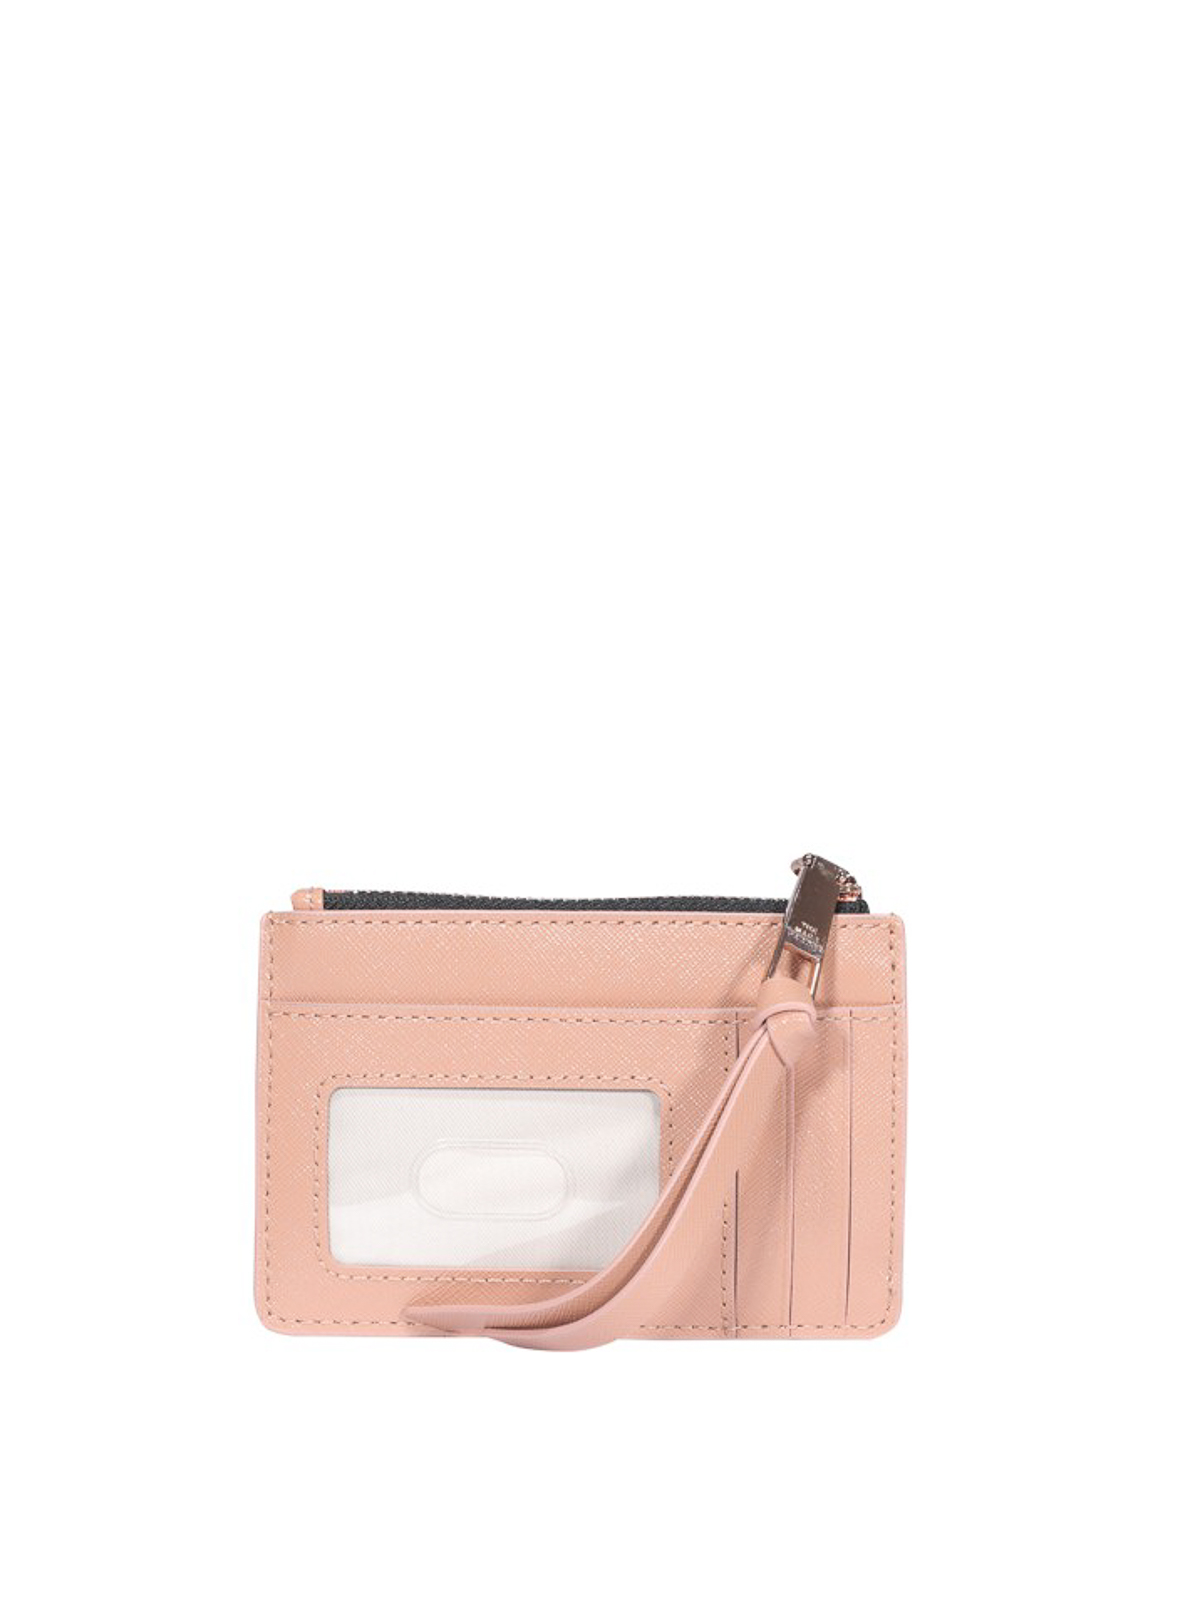 Marc Jacobs The Snapshot DTM for Women